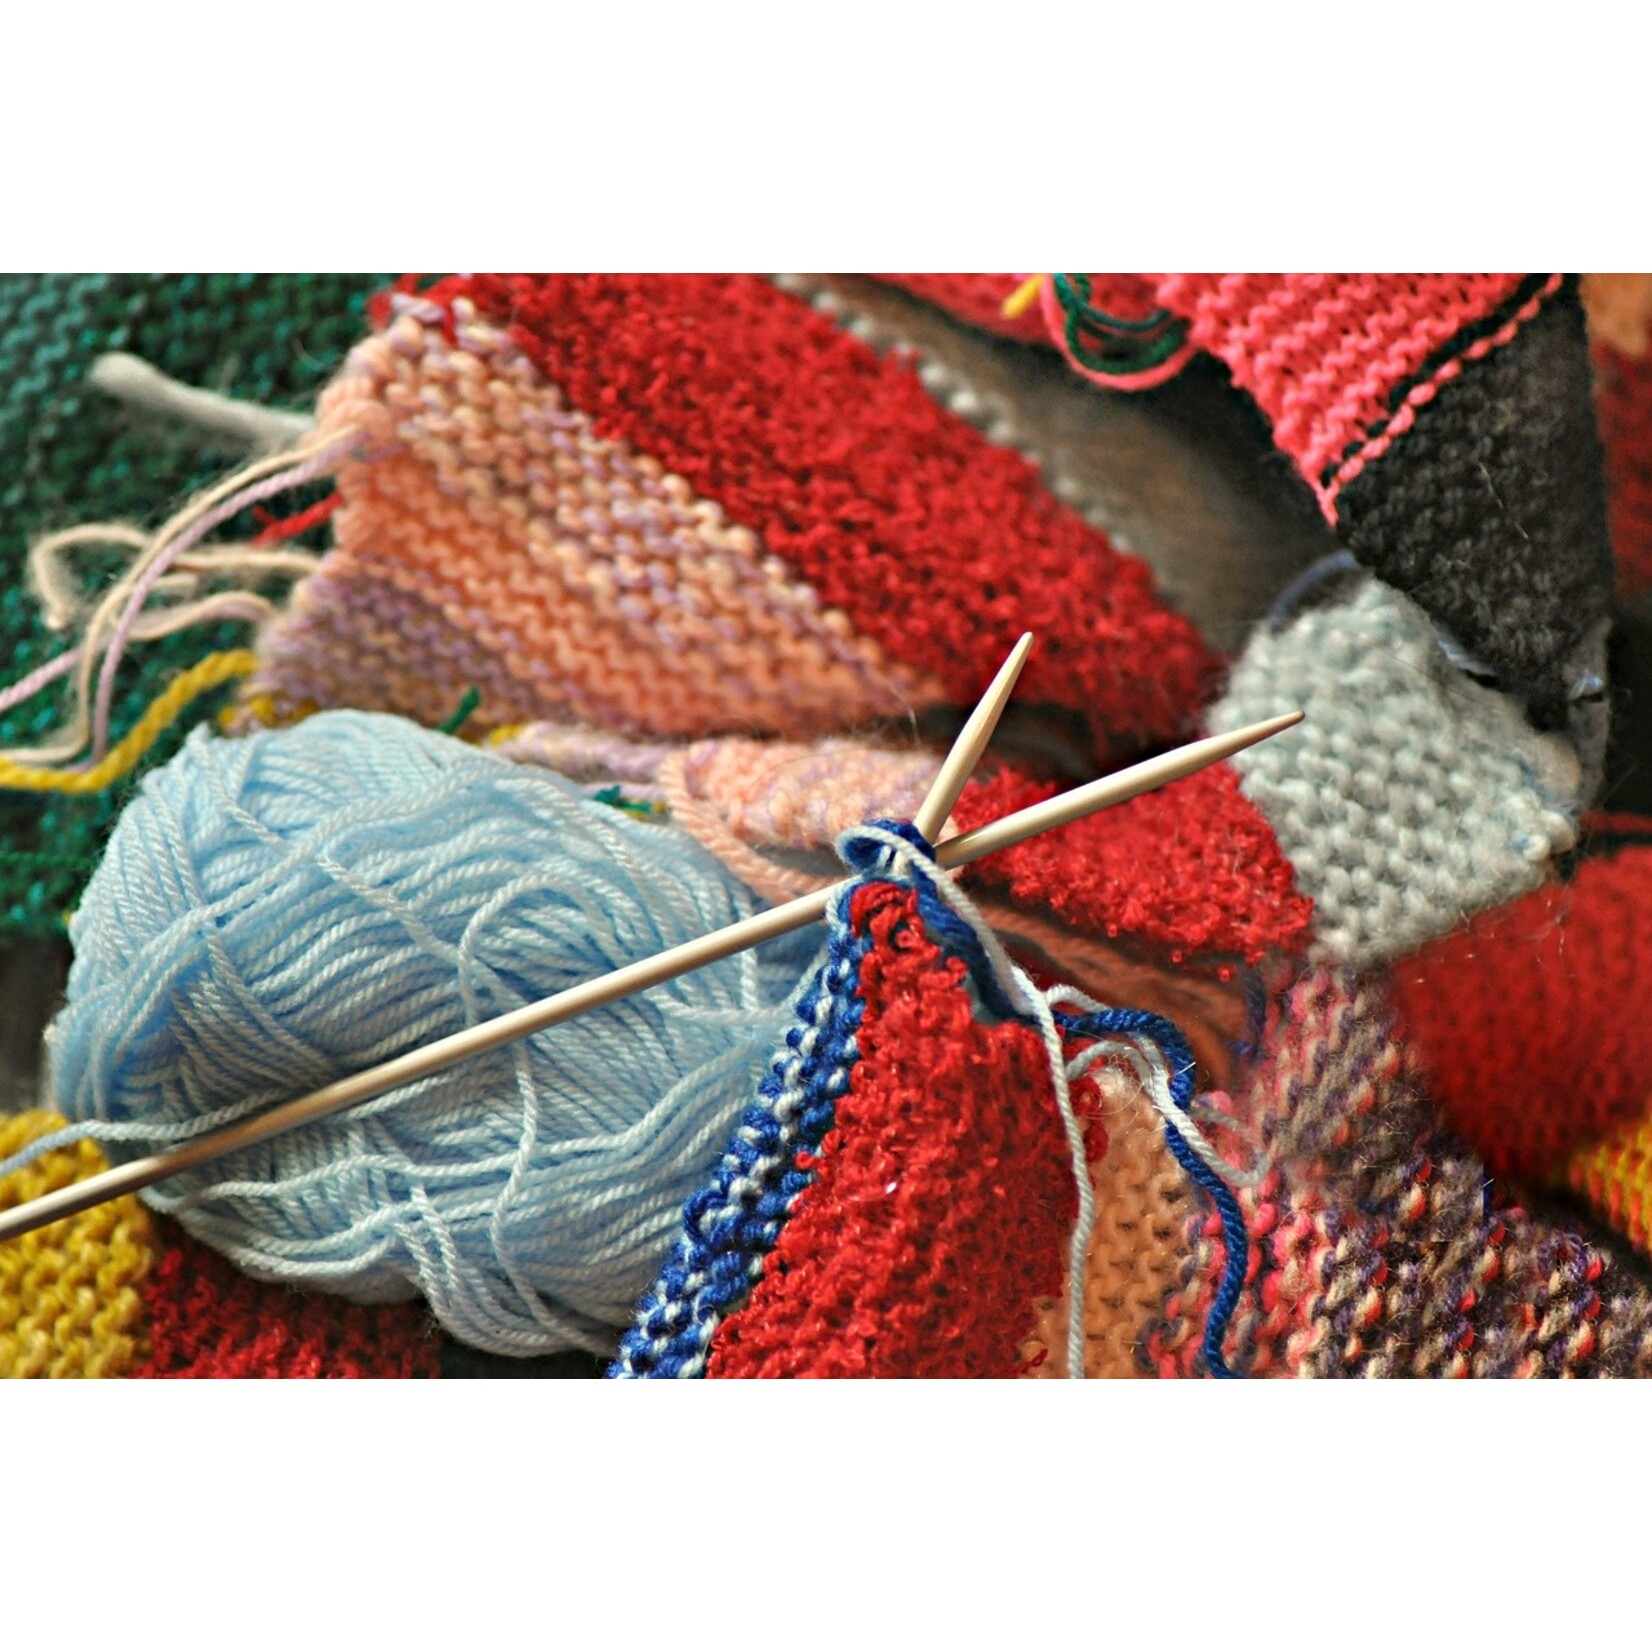 KKN Knitting with Barb - Oct 3rd, 10th, 17th, 24th, 31st